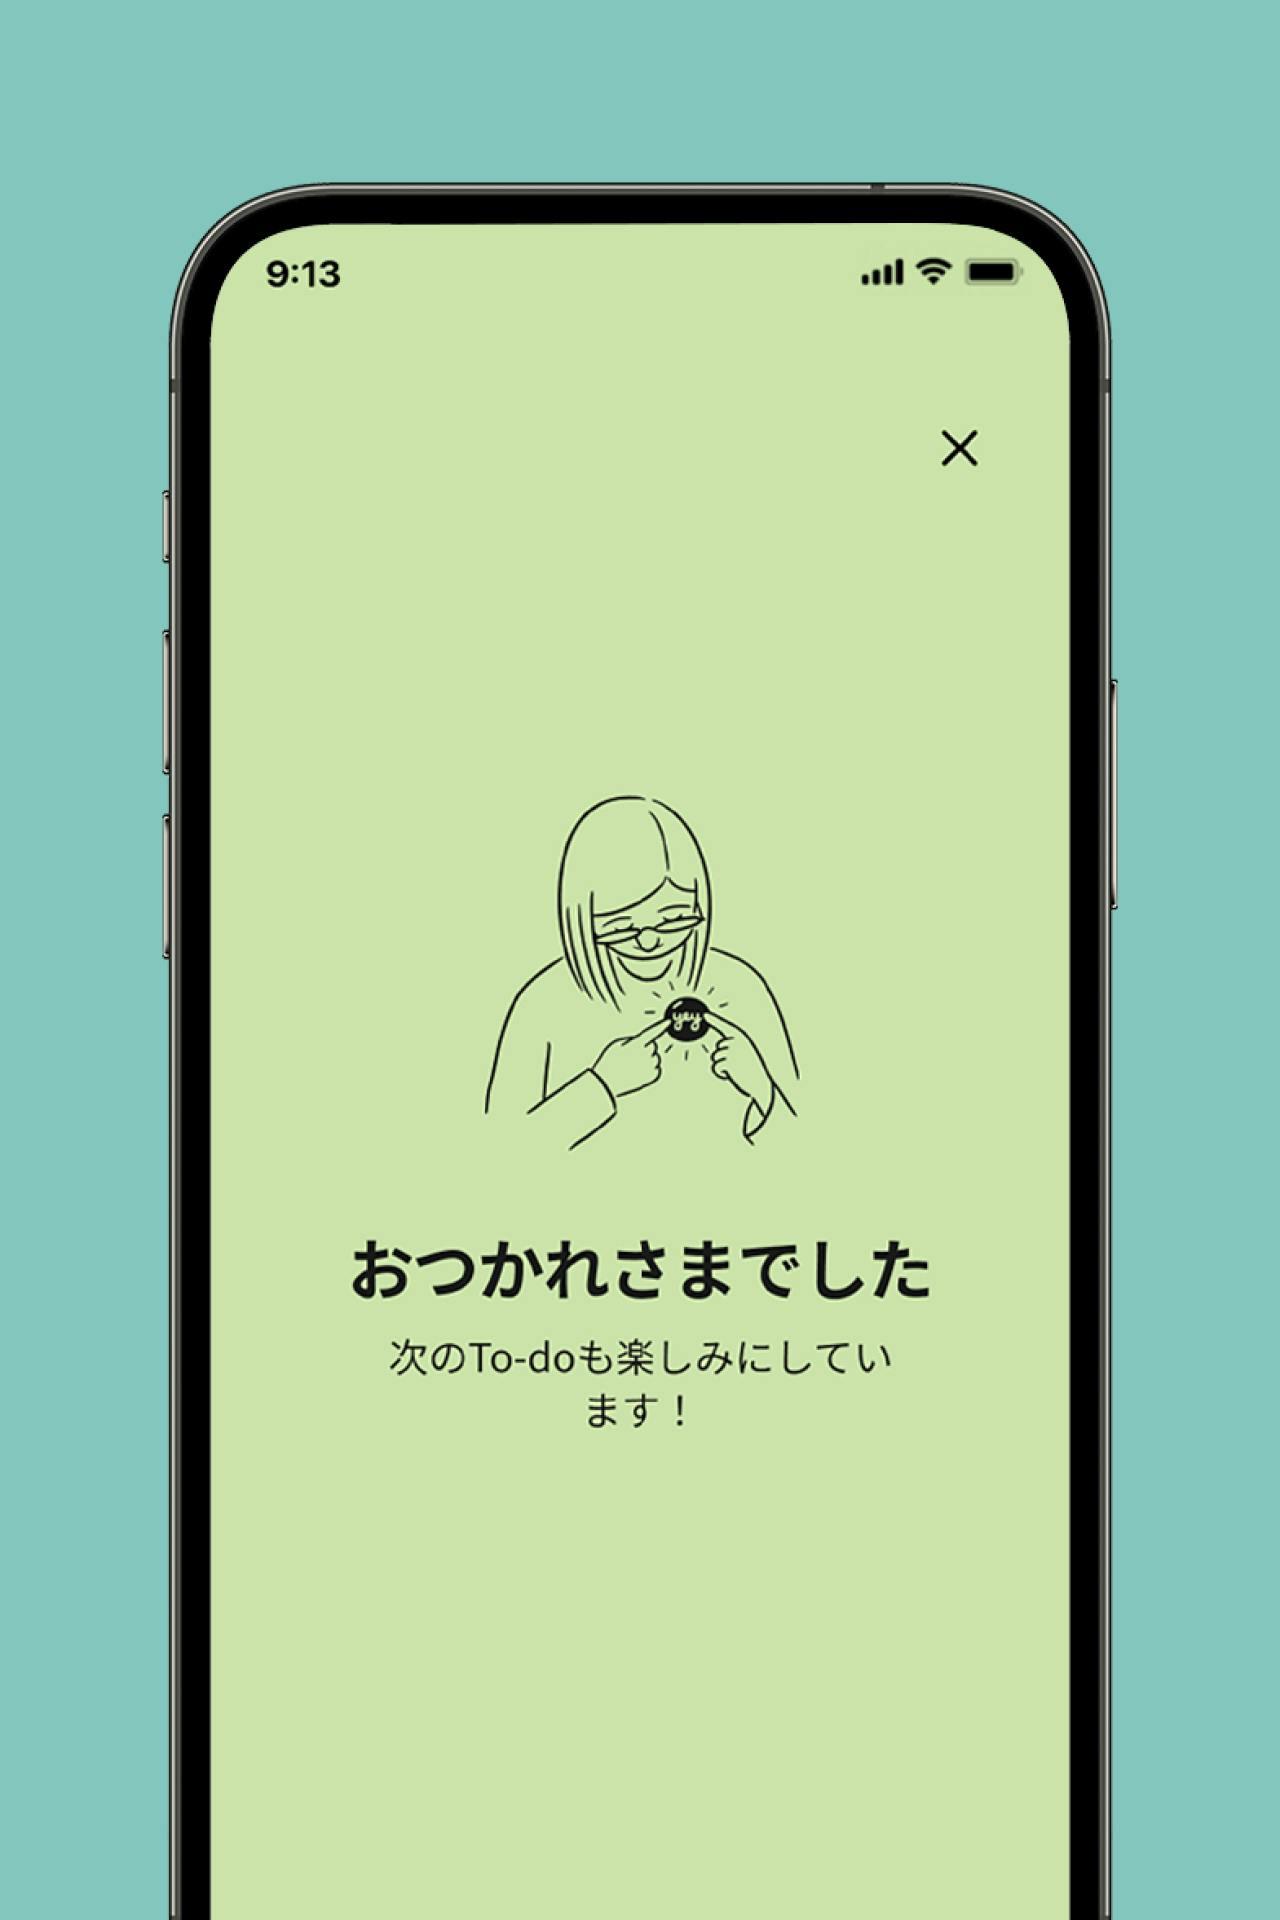 To-doが完了した際の表示画面